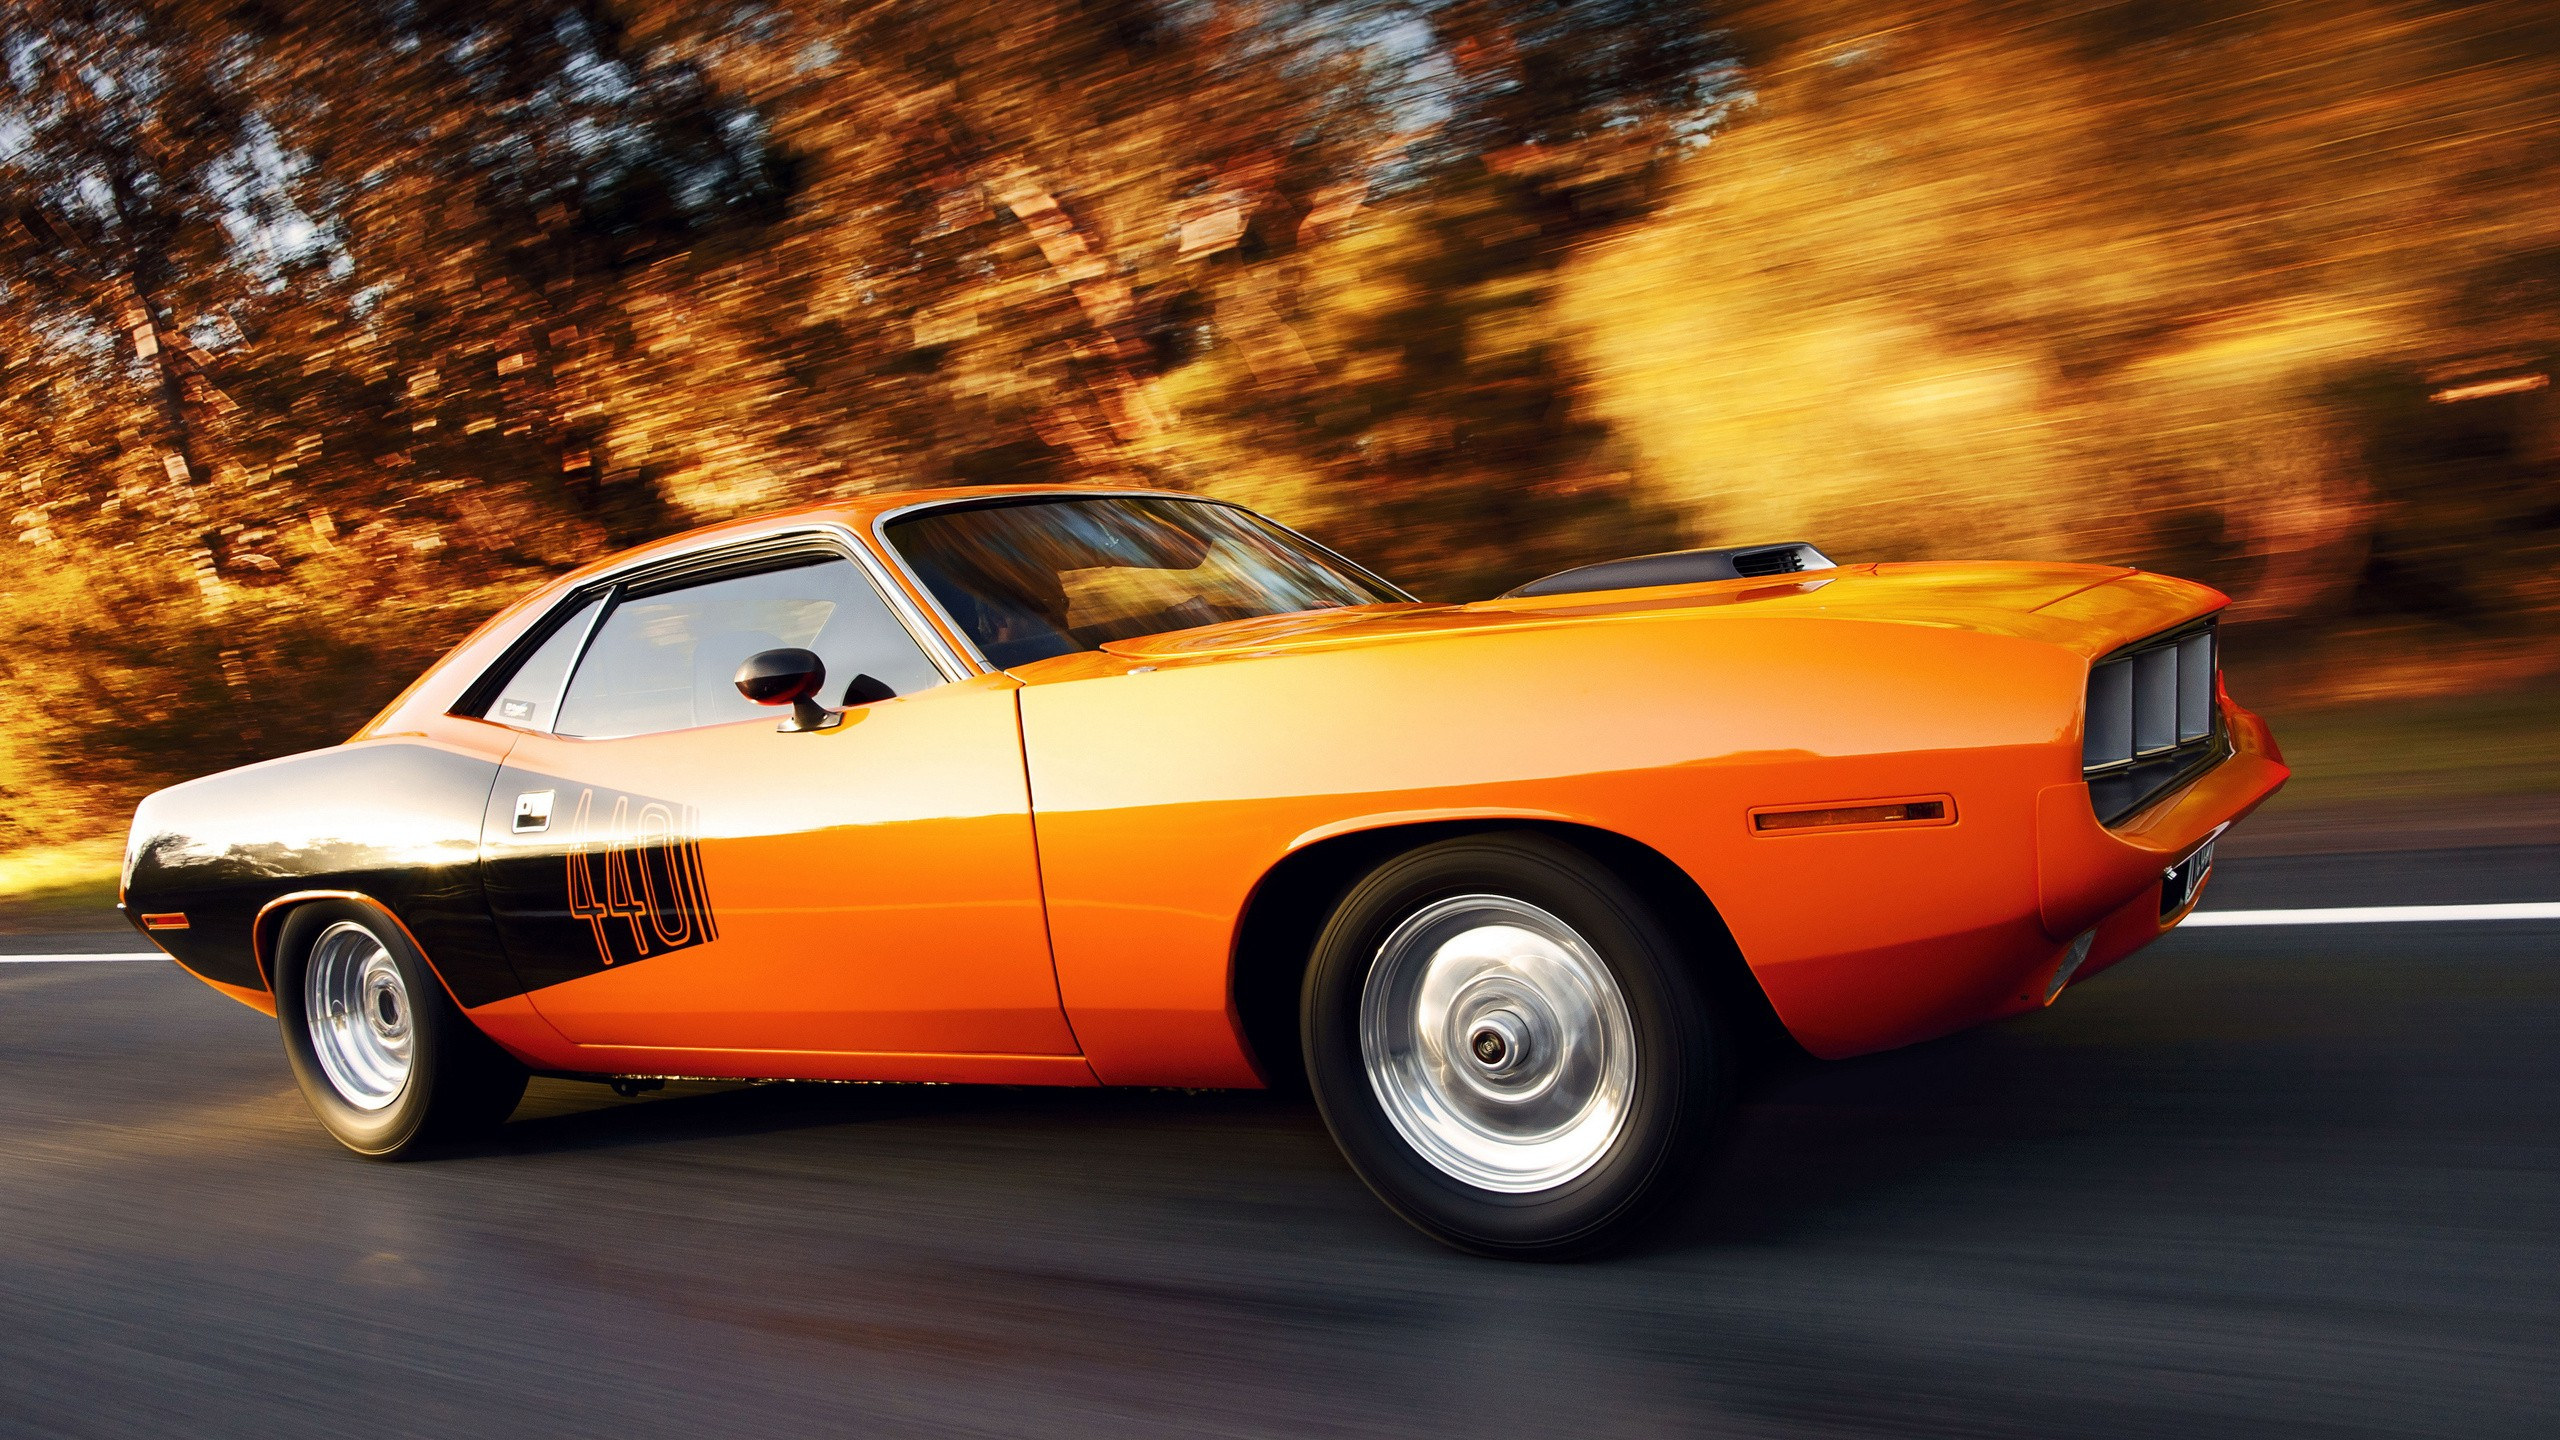 2560x1440 Wallpaper : px, car, orange cars, Plymouth Barracuda CoolWallpapers 746378 HD Wallpapers